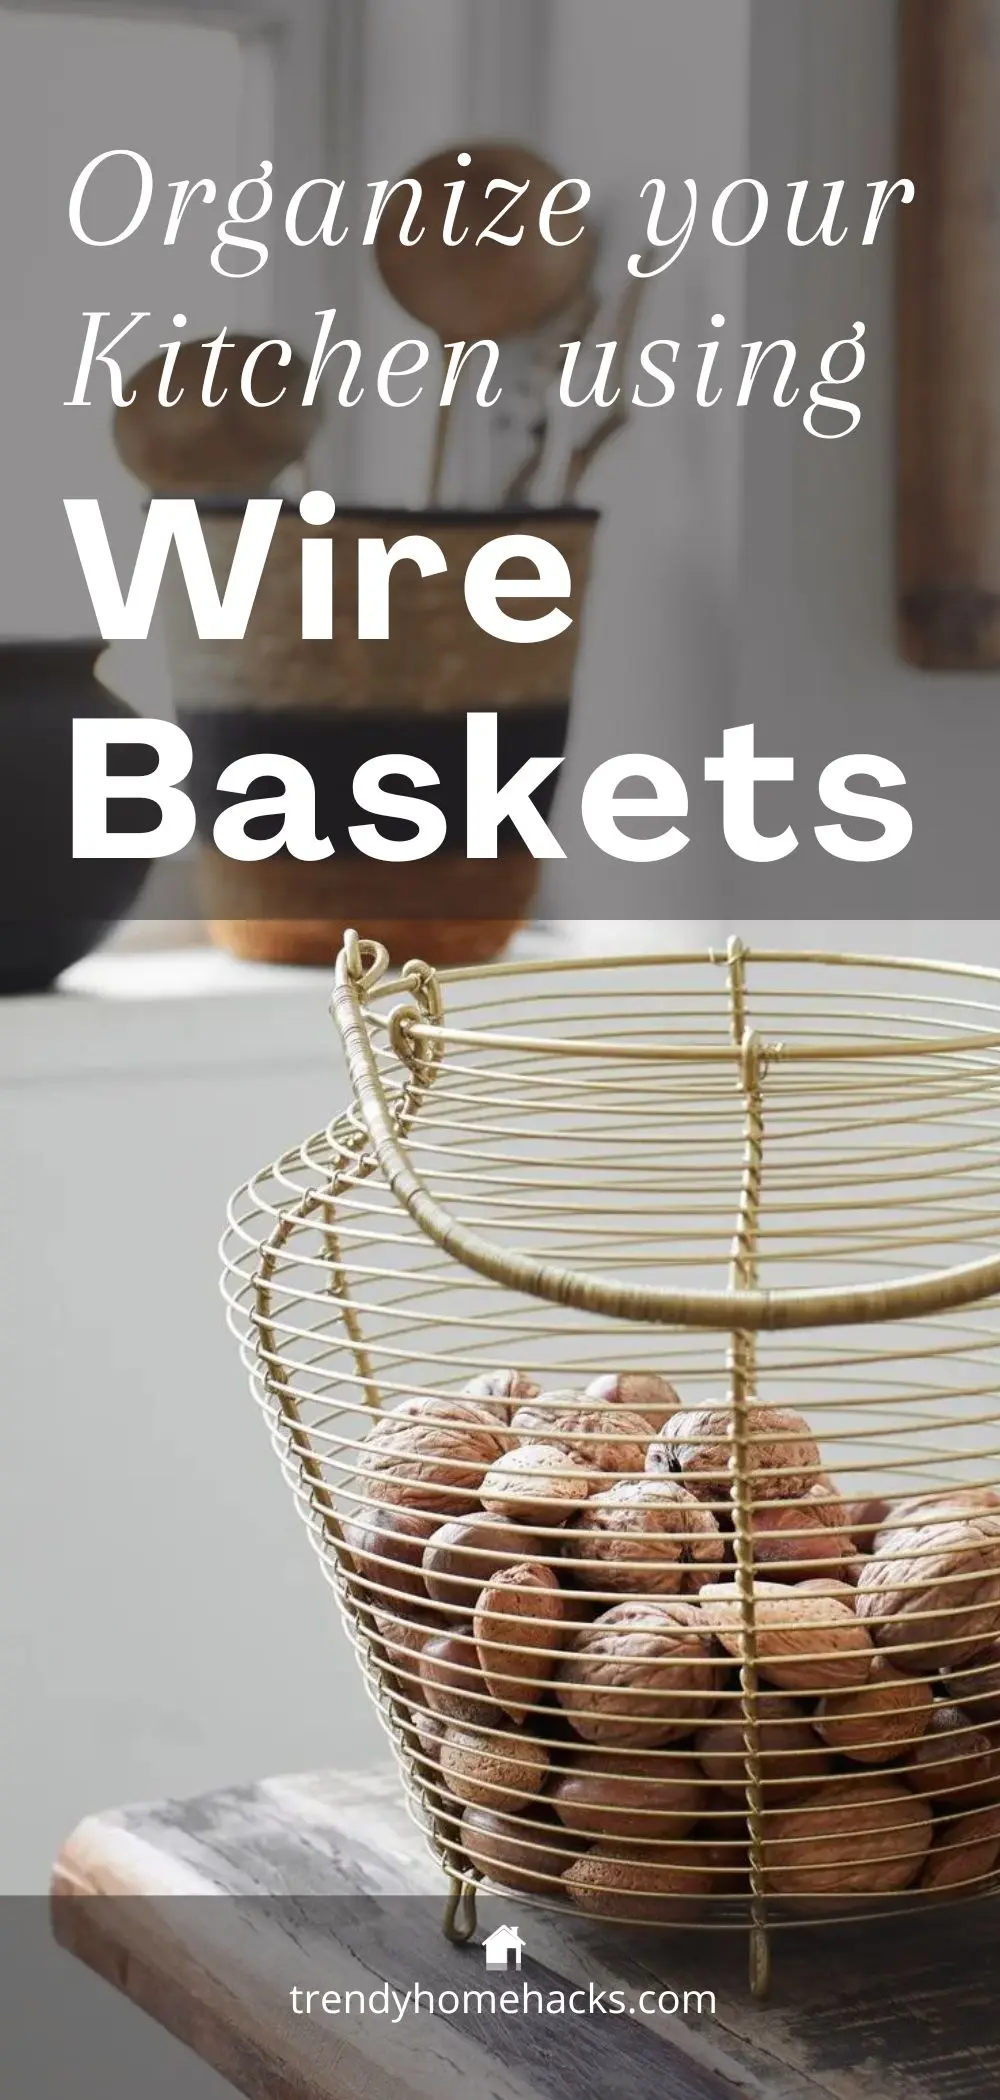 a wire basket has many benefits when used the right way in the home like showcased with this Pinterest pin as organization item in the kitchen.